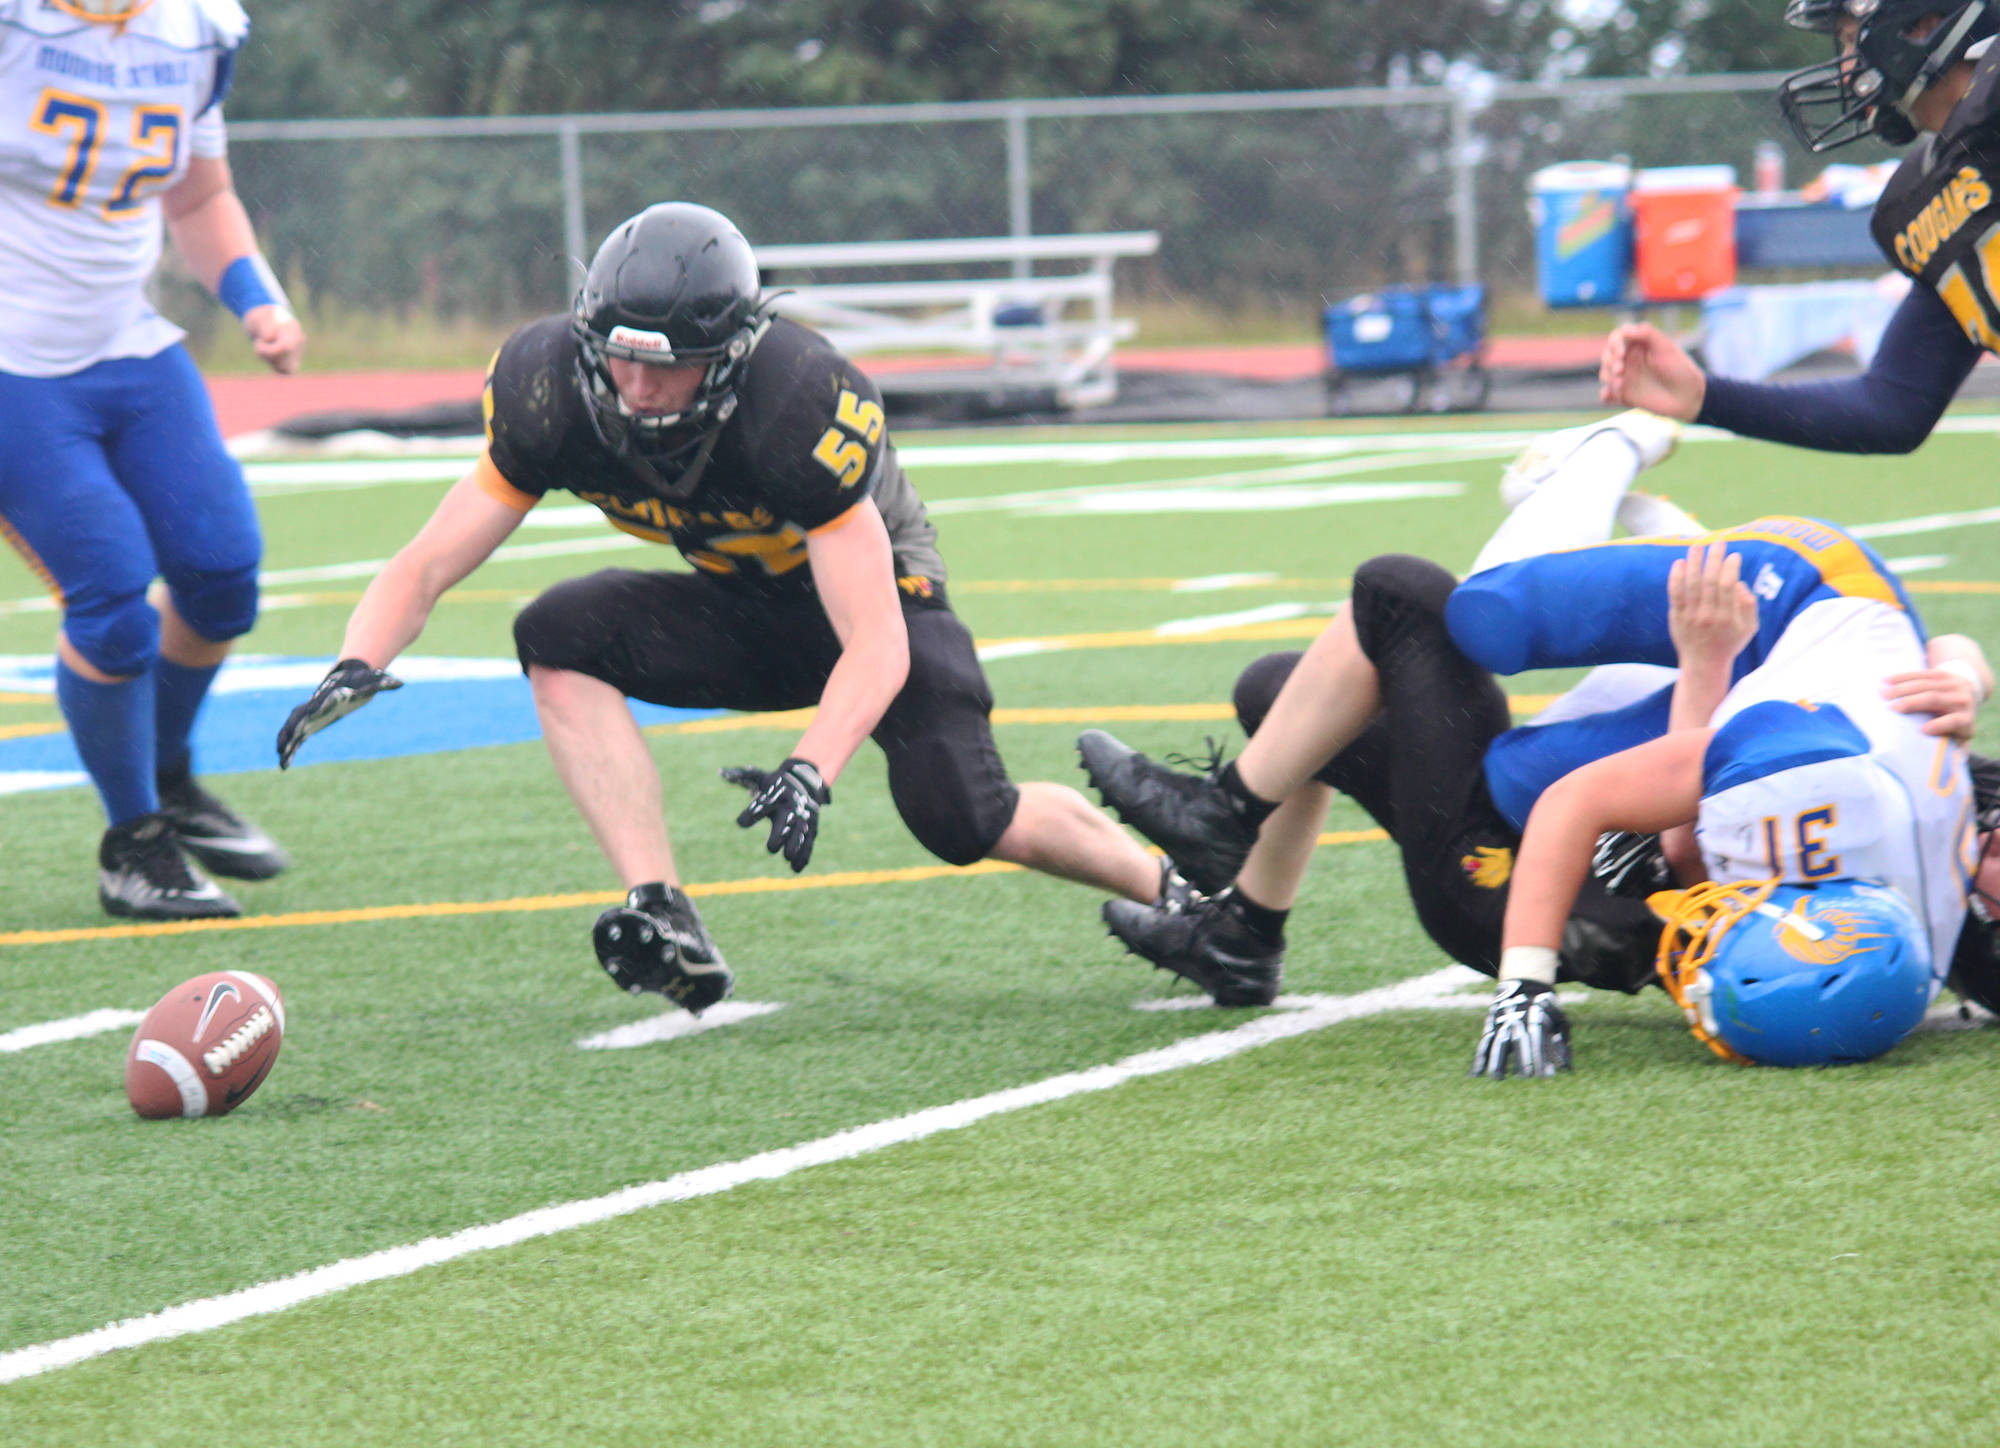 Offensive and defensive lineman Nikit Anufriev, a senior, dives for a fumbled ball during the Voznesenka Cougars’ game against Monroe Catholic High School on Saturday, Aug. 26, 2017 at the Homer Mariners’ field in Homer, Alaska. The Fairbanks team defeated Voznesenka 26-0. (Photo by Megan Pacer/Homer News)